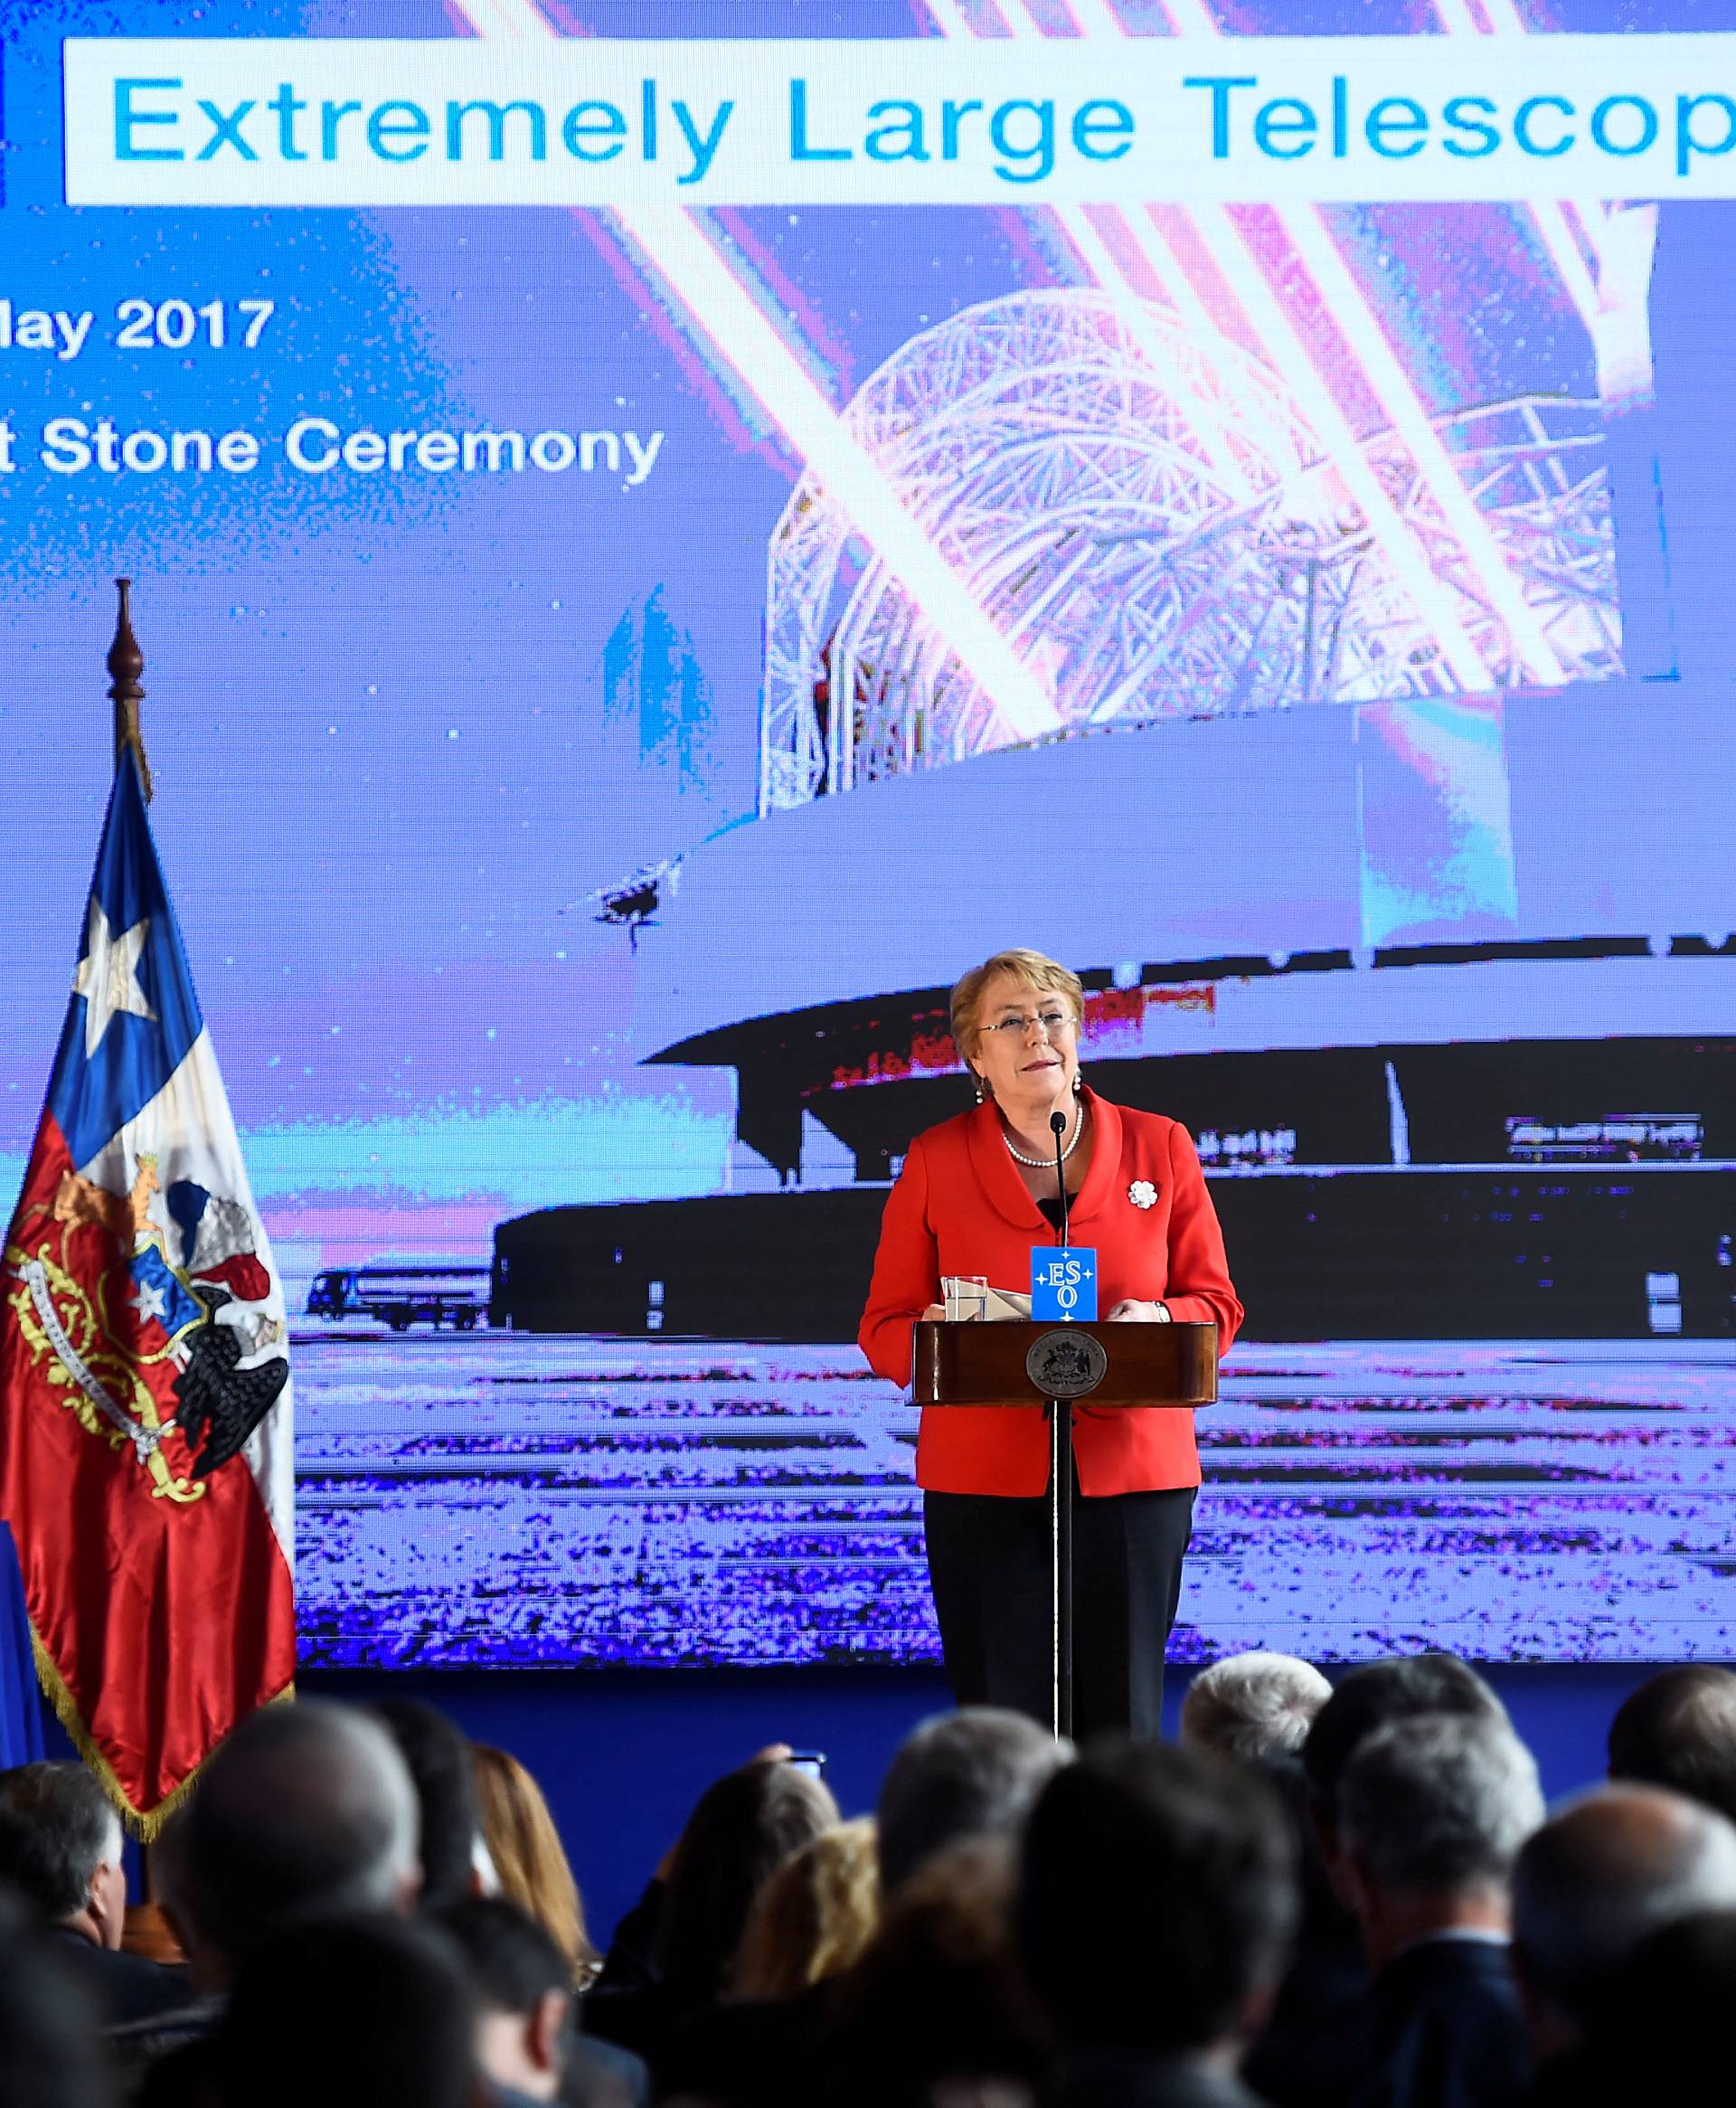 Chile's President Bachelet speaks during a ceremony to inaugurate the construction of the world's largest telescope in the desert of Atacama